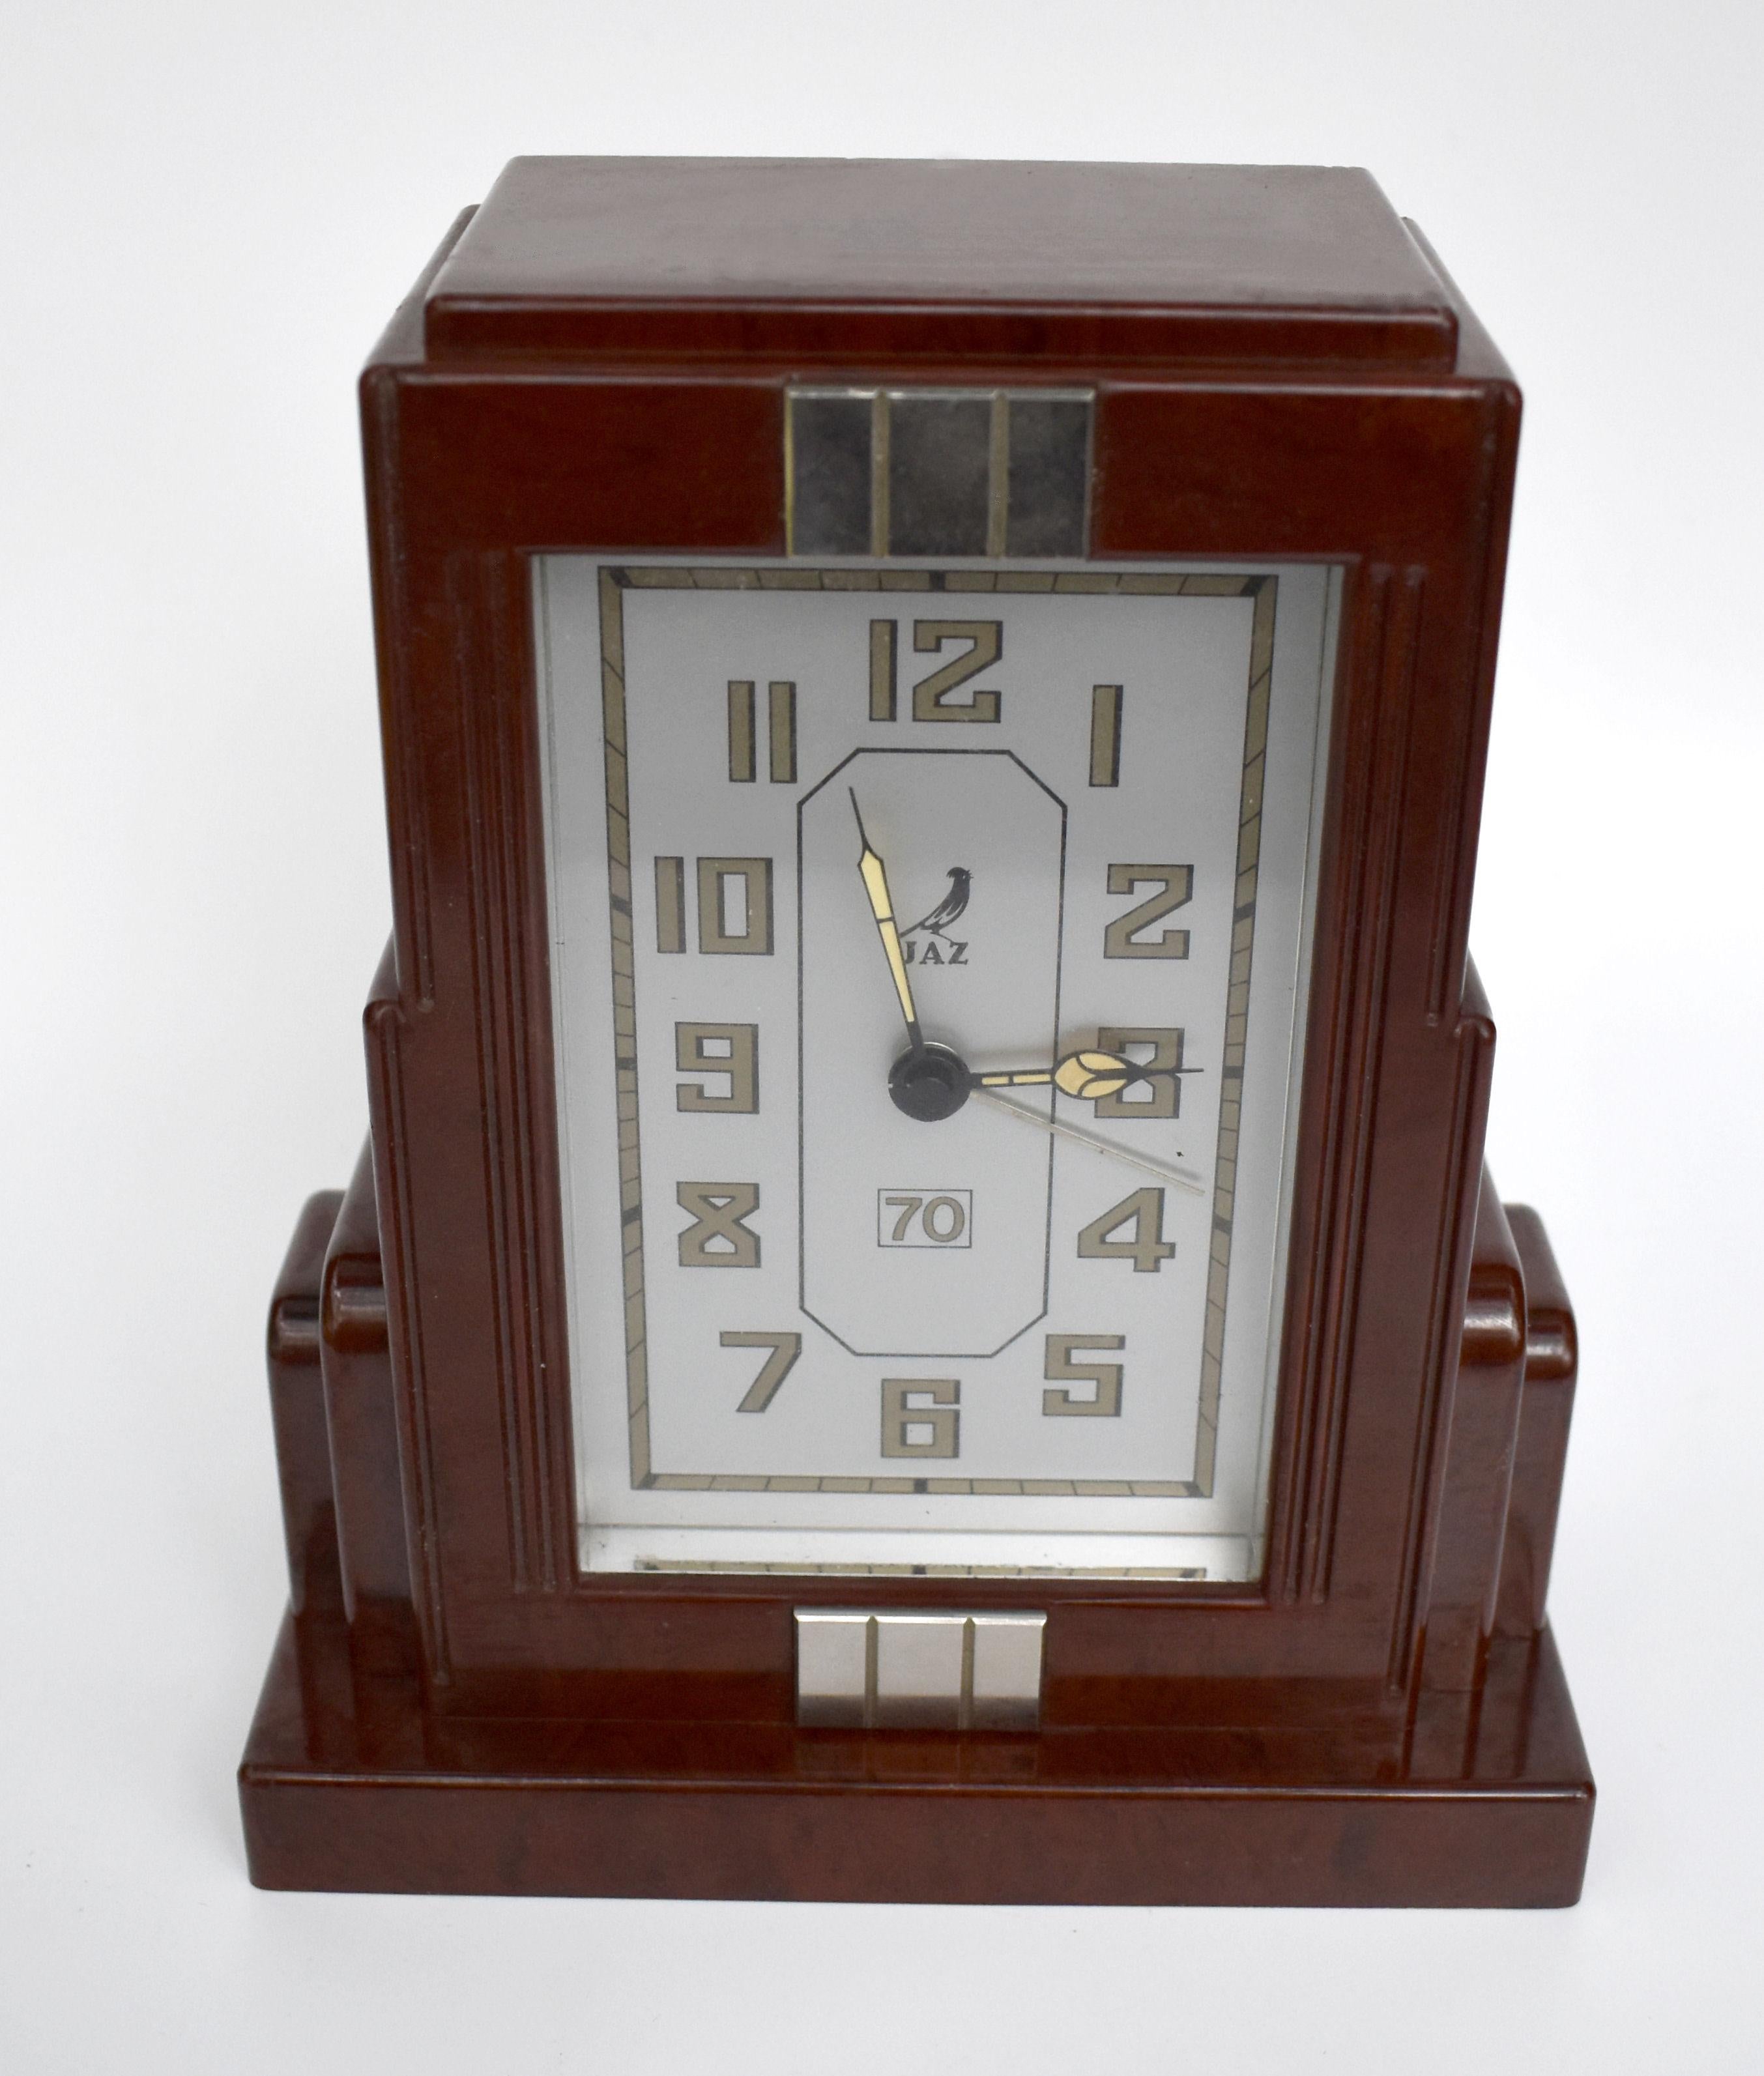 Fabulous Art Deco clock by JAZ a French clock maker. This clock is red bakelite a wonderful skyscraper shaped casing. The condition of the face is particularly good showing little to no signs of it's true age. The bakelite case is also in good